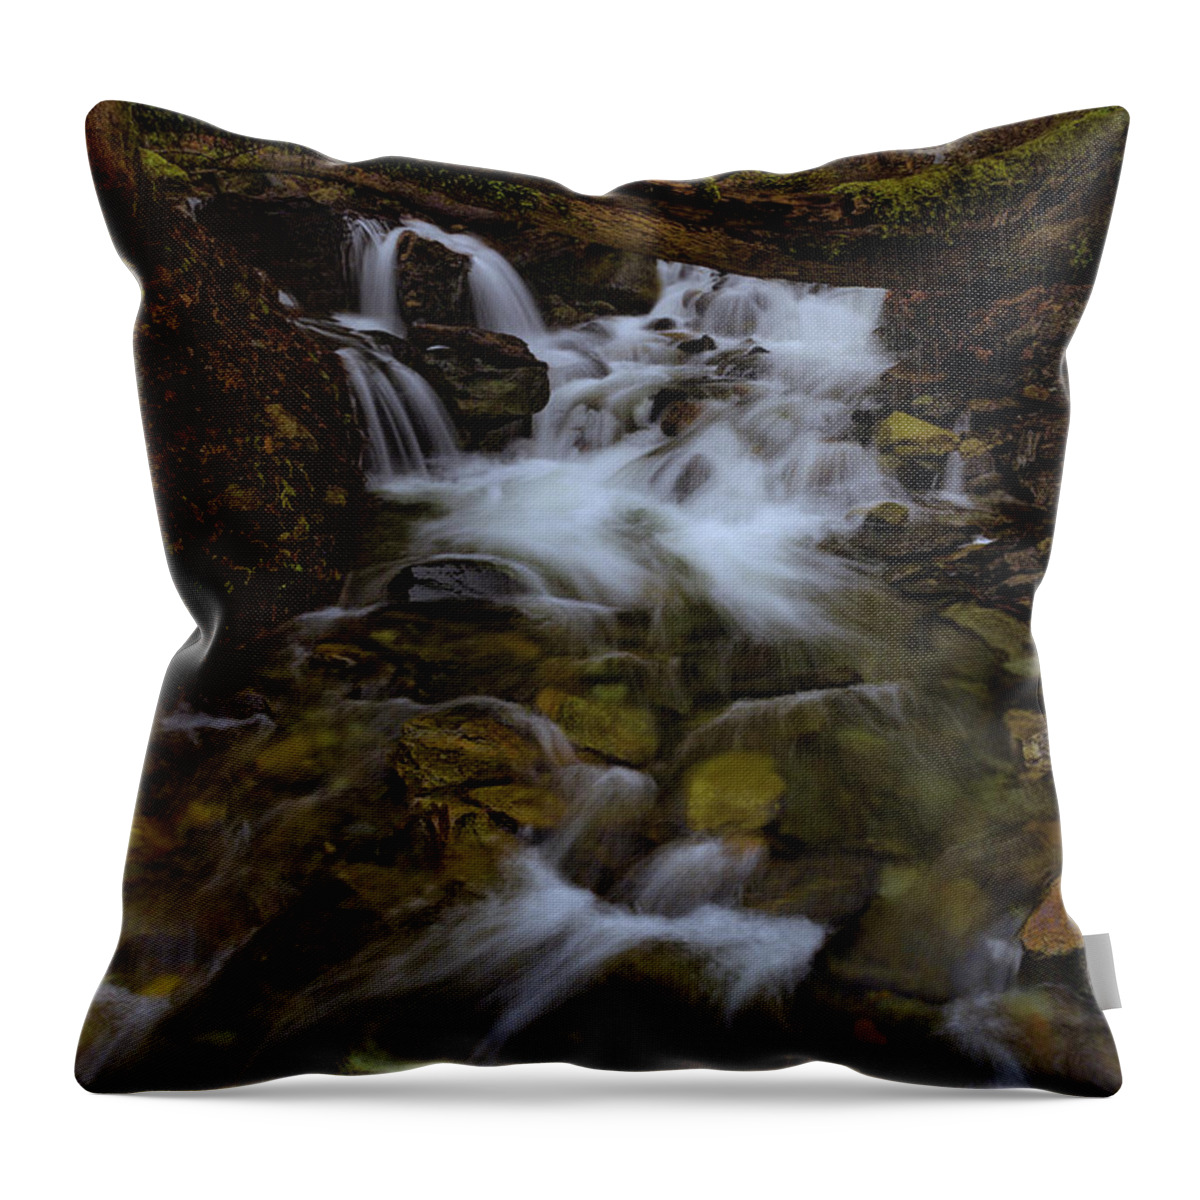 California Throw Pillow featuring the photograph An Unkown Creek in the Feather River Canyon by Don Hoekwater Photography